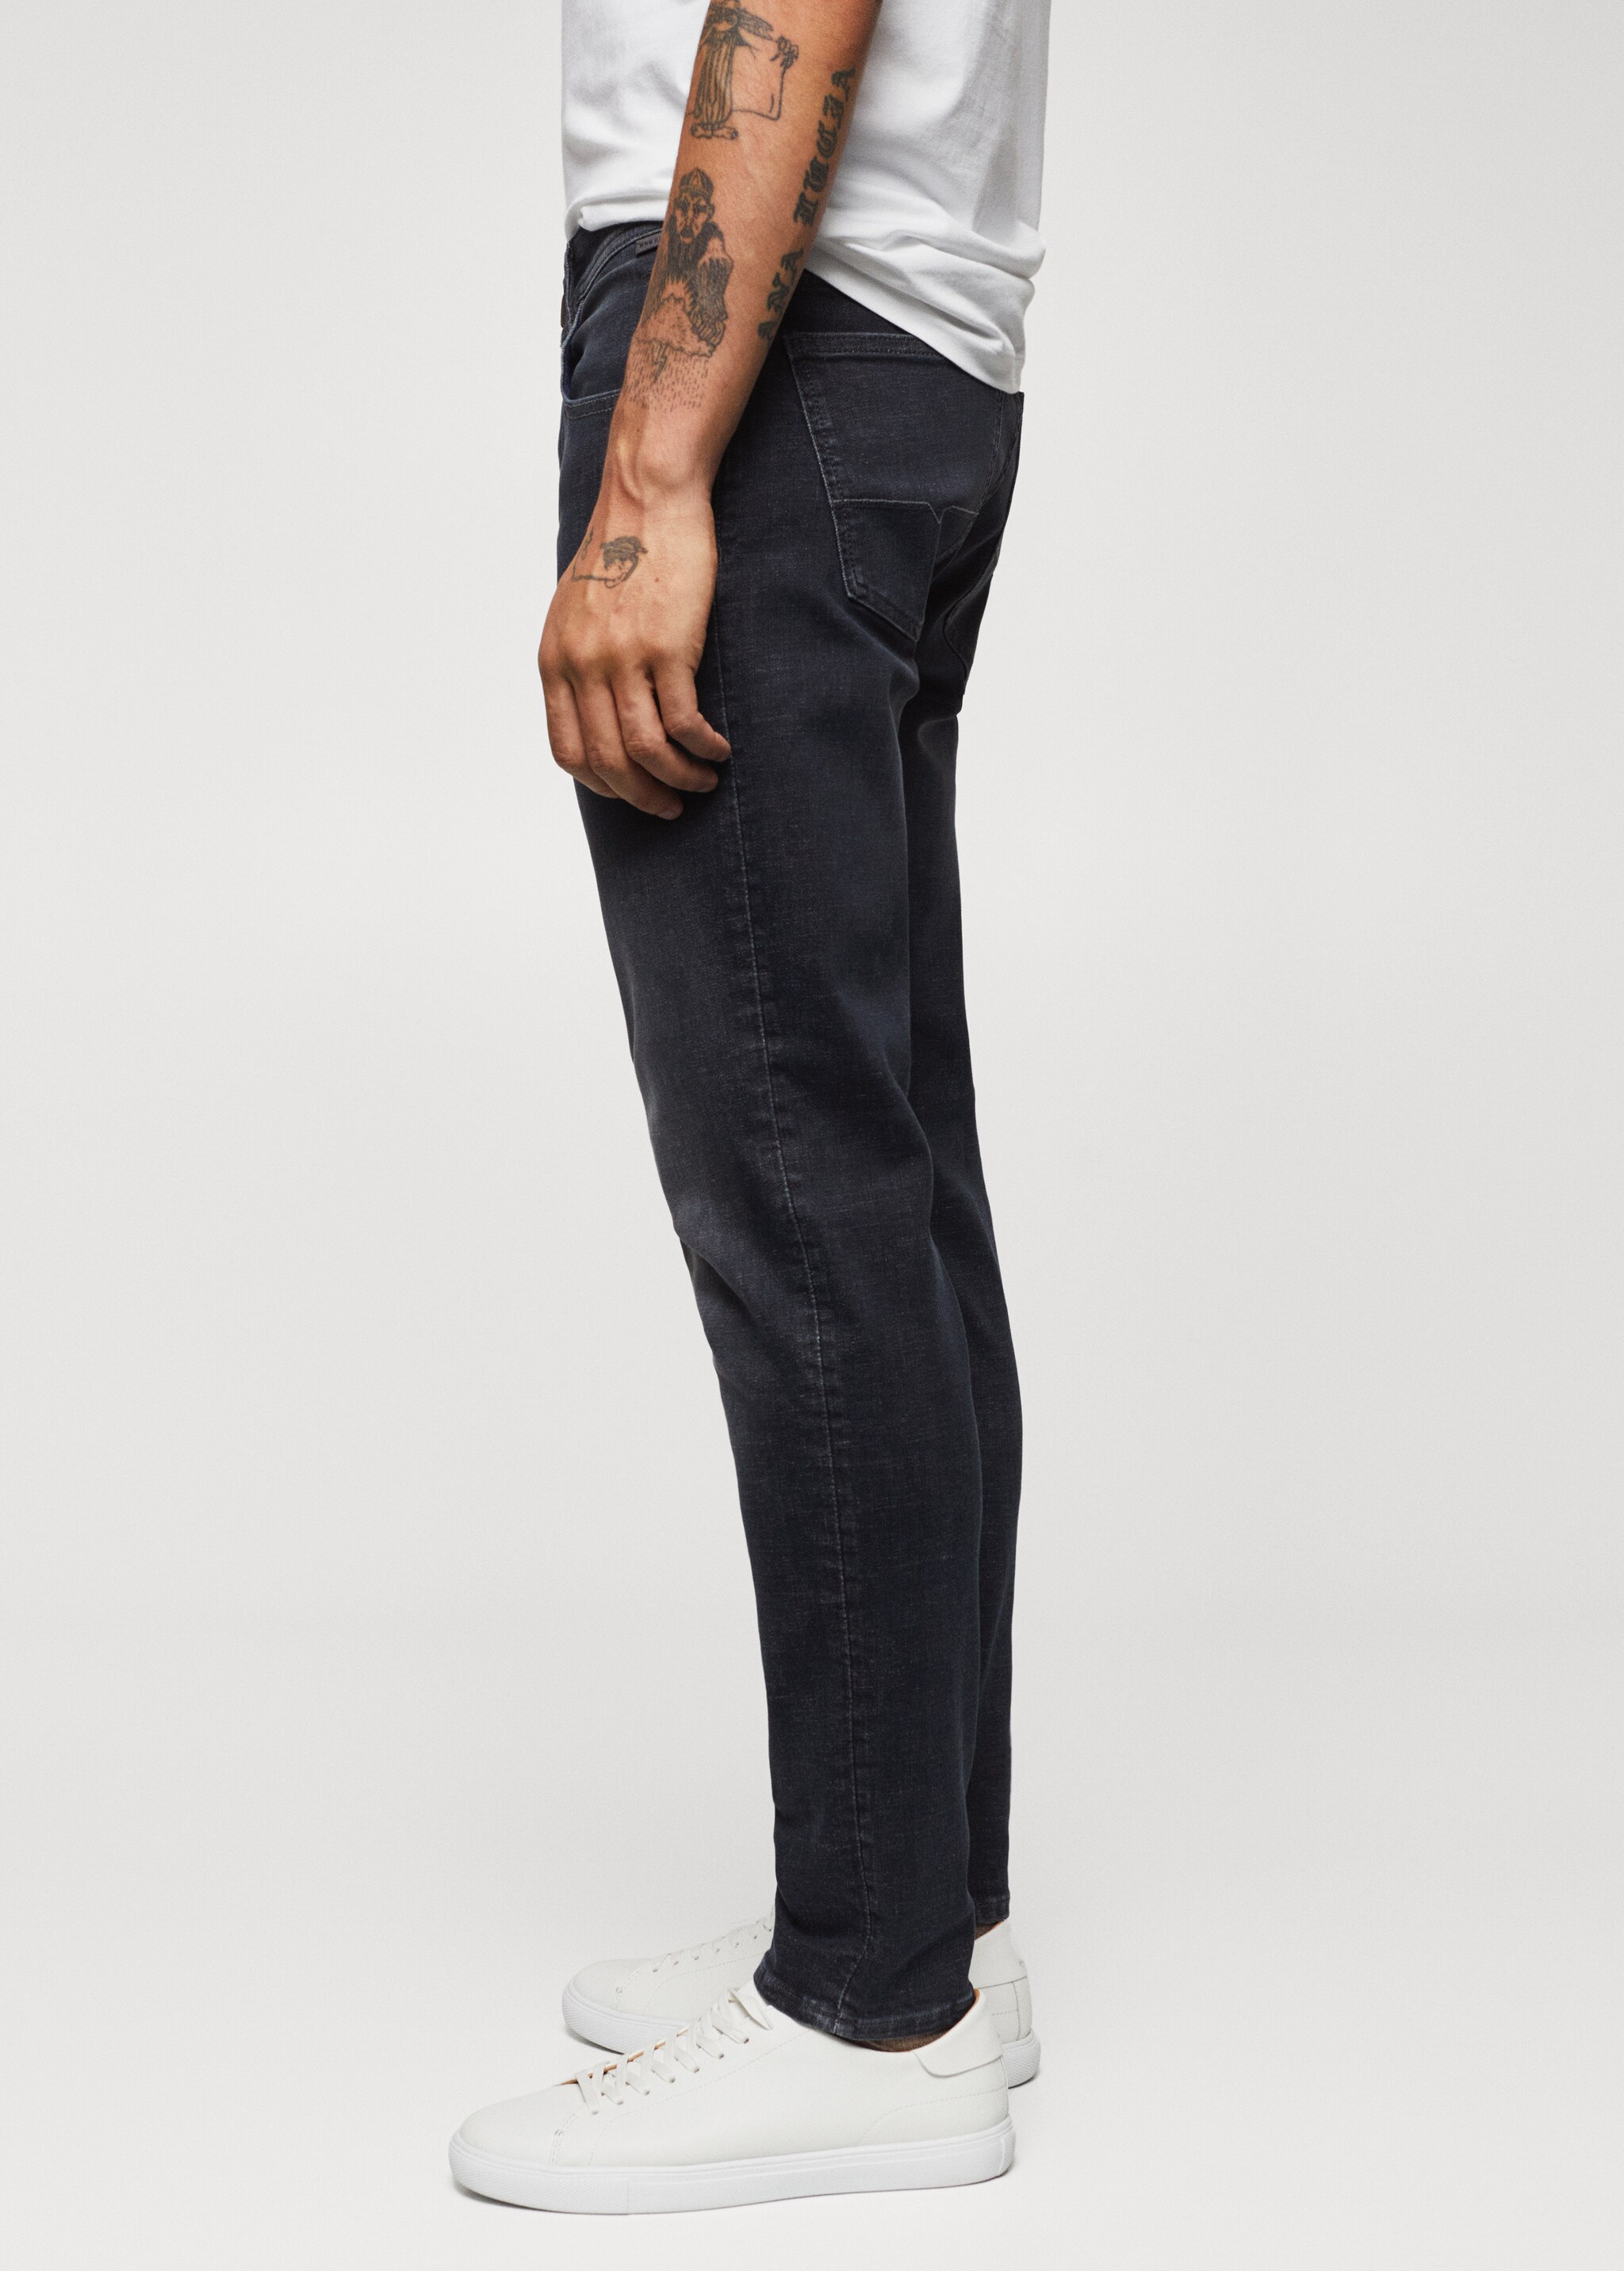 Premium skinny jeans - Details of the article 4